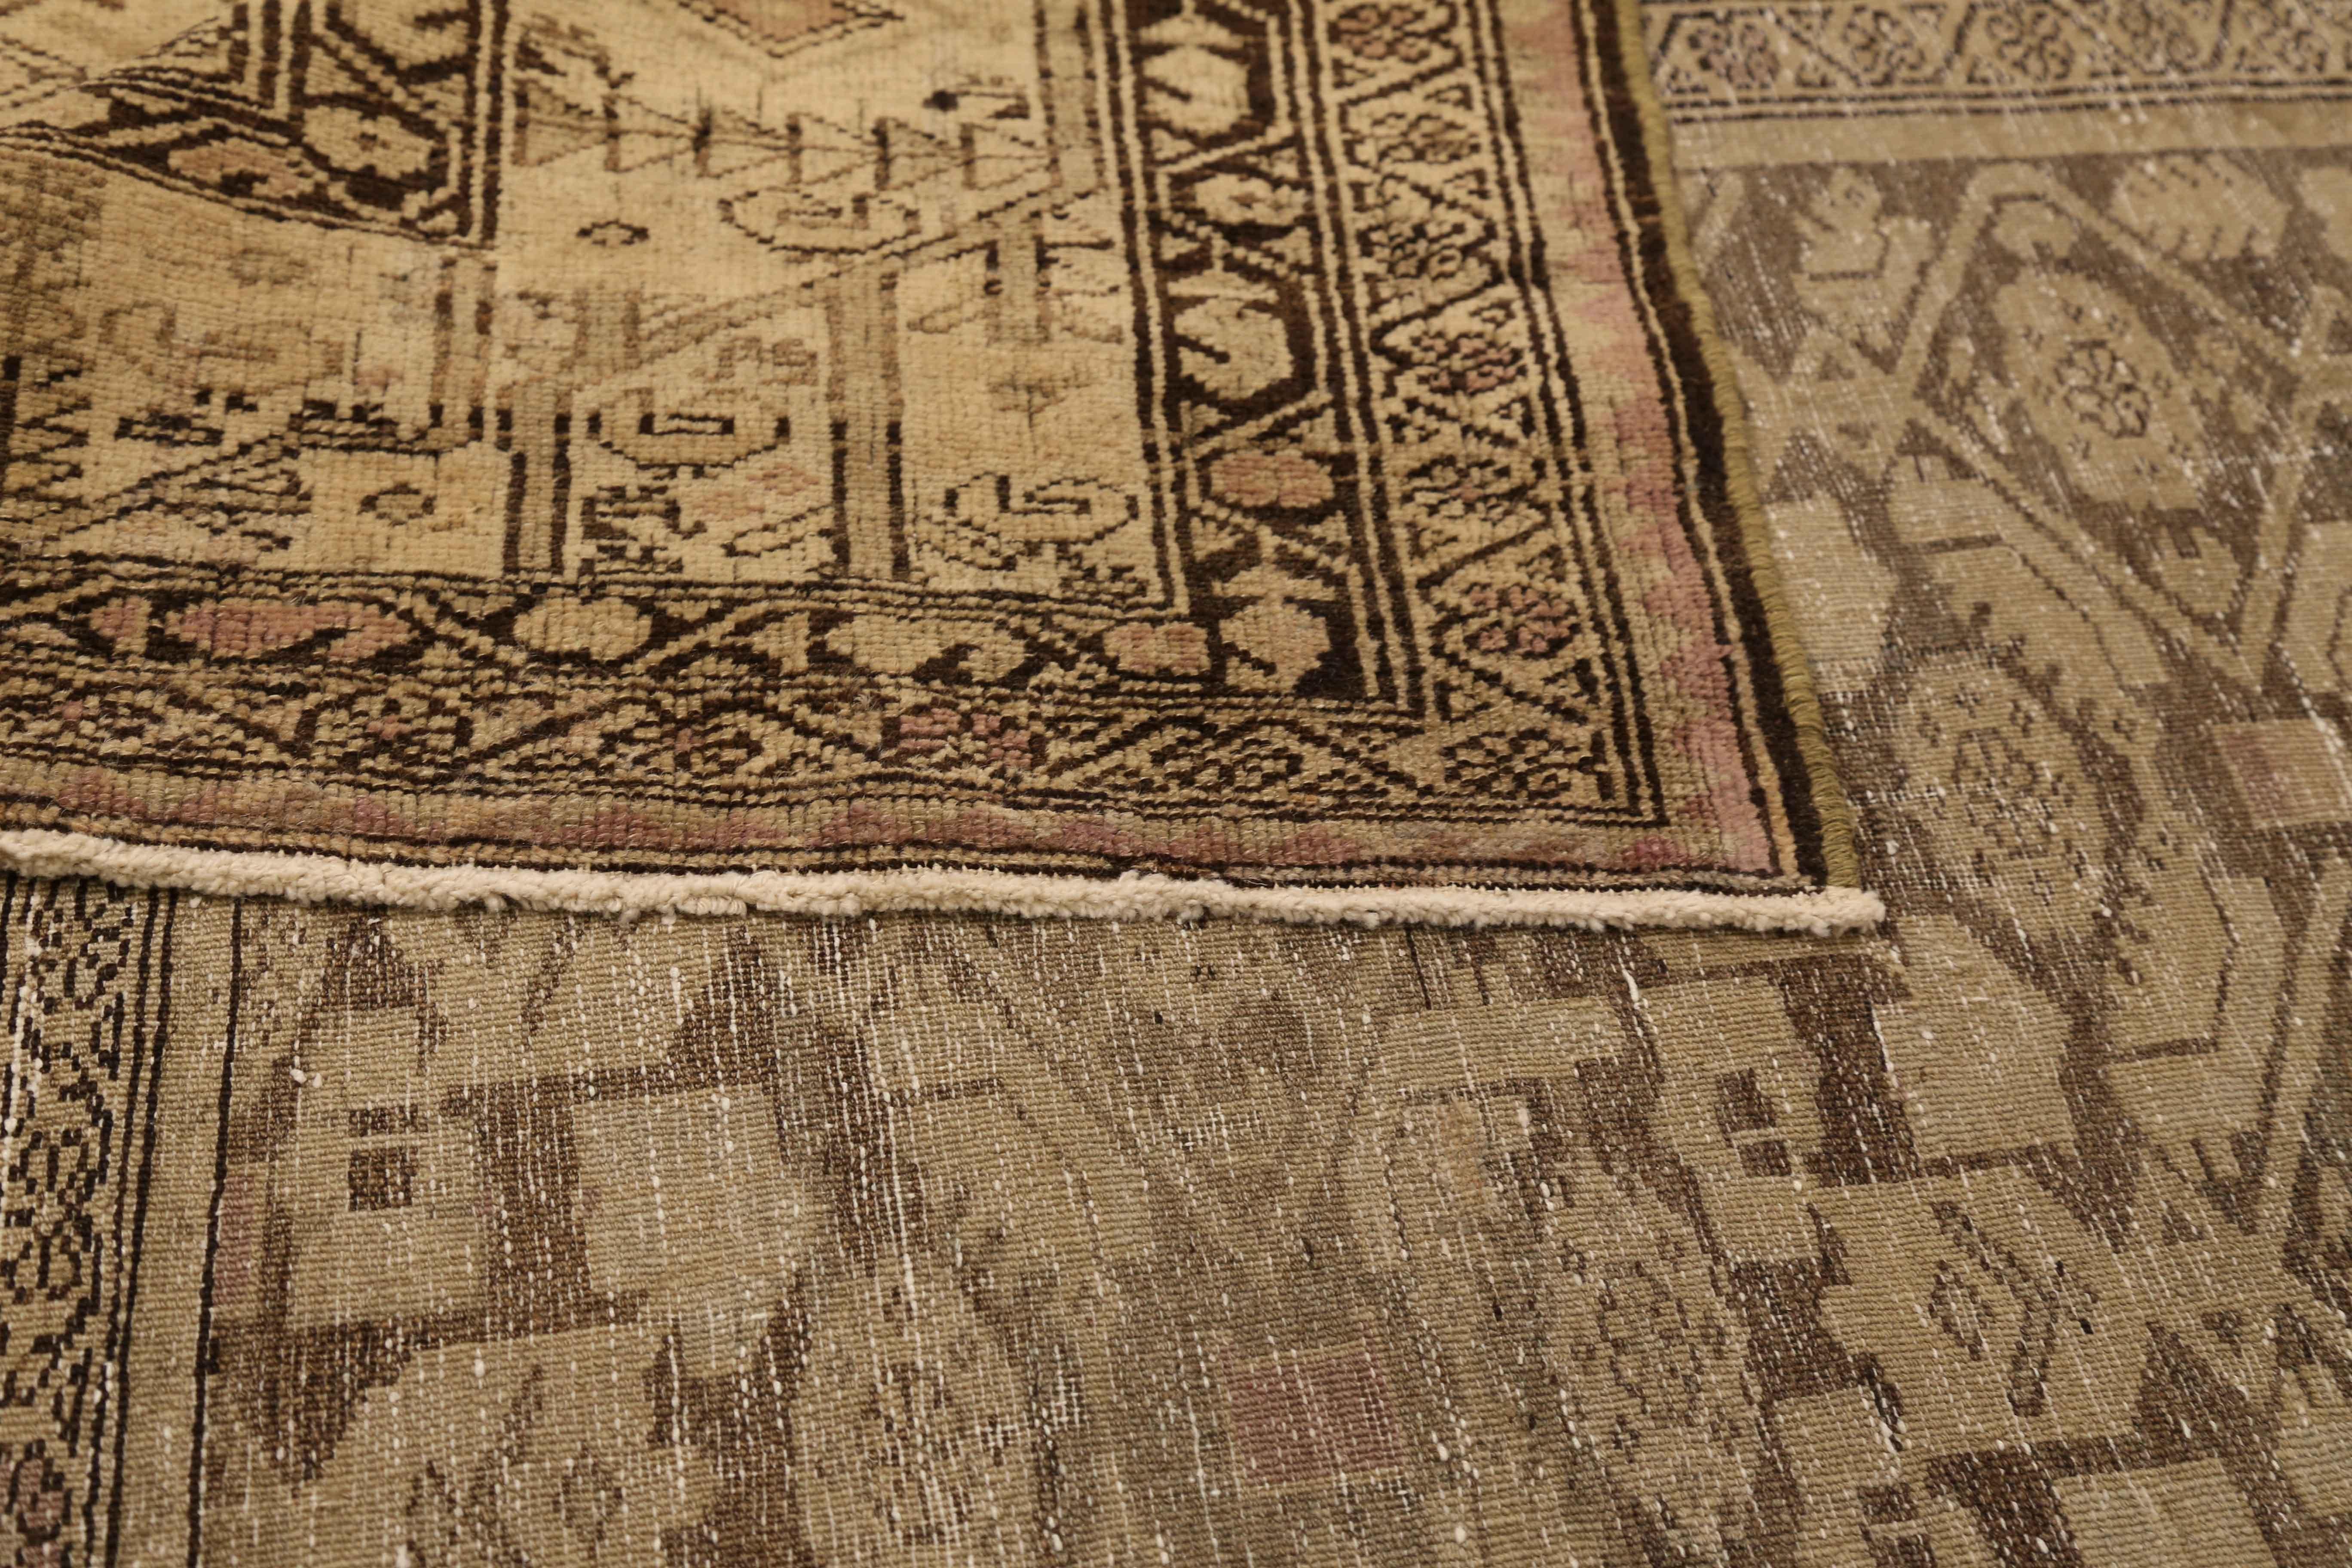 Antique Persian rug made from high grade wool and vegetable dyes. Created in the 1930s, this beautiful rug has an earthy and rustic appeal due to the mix of beige and black with hints of green and pink. It features incredible floral patterns that